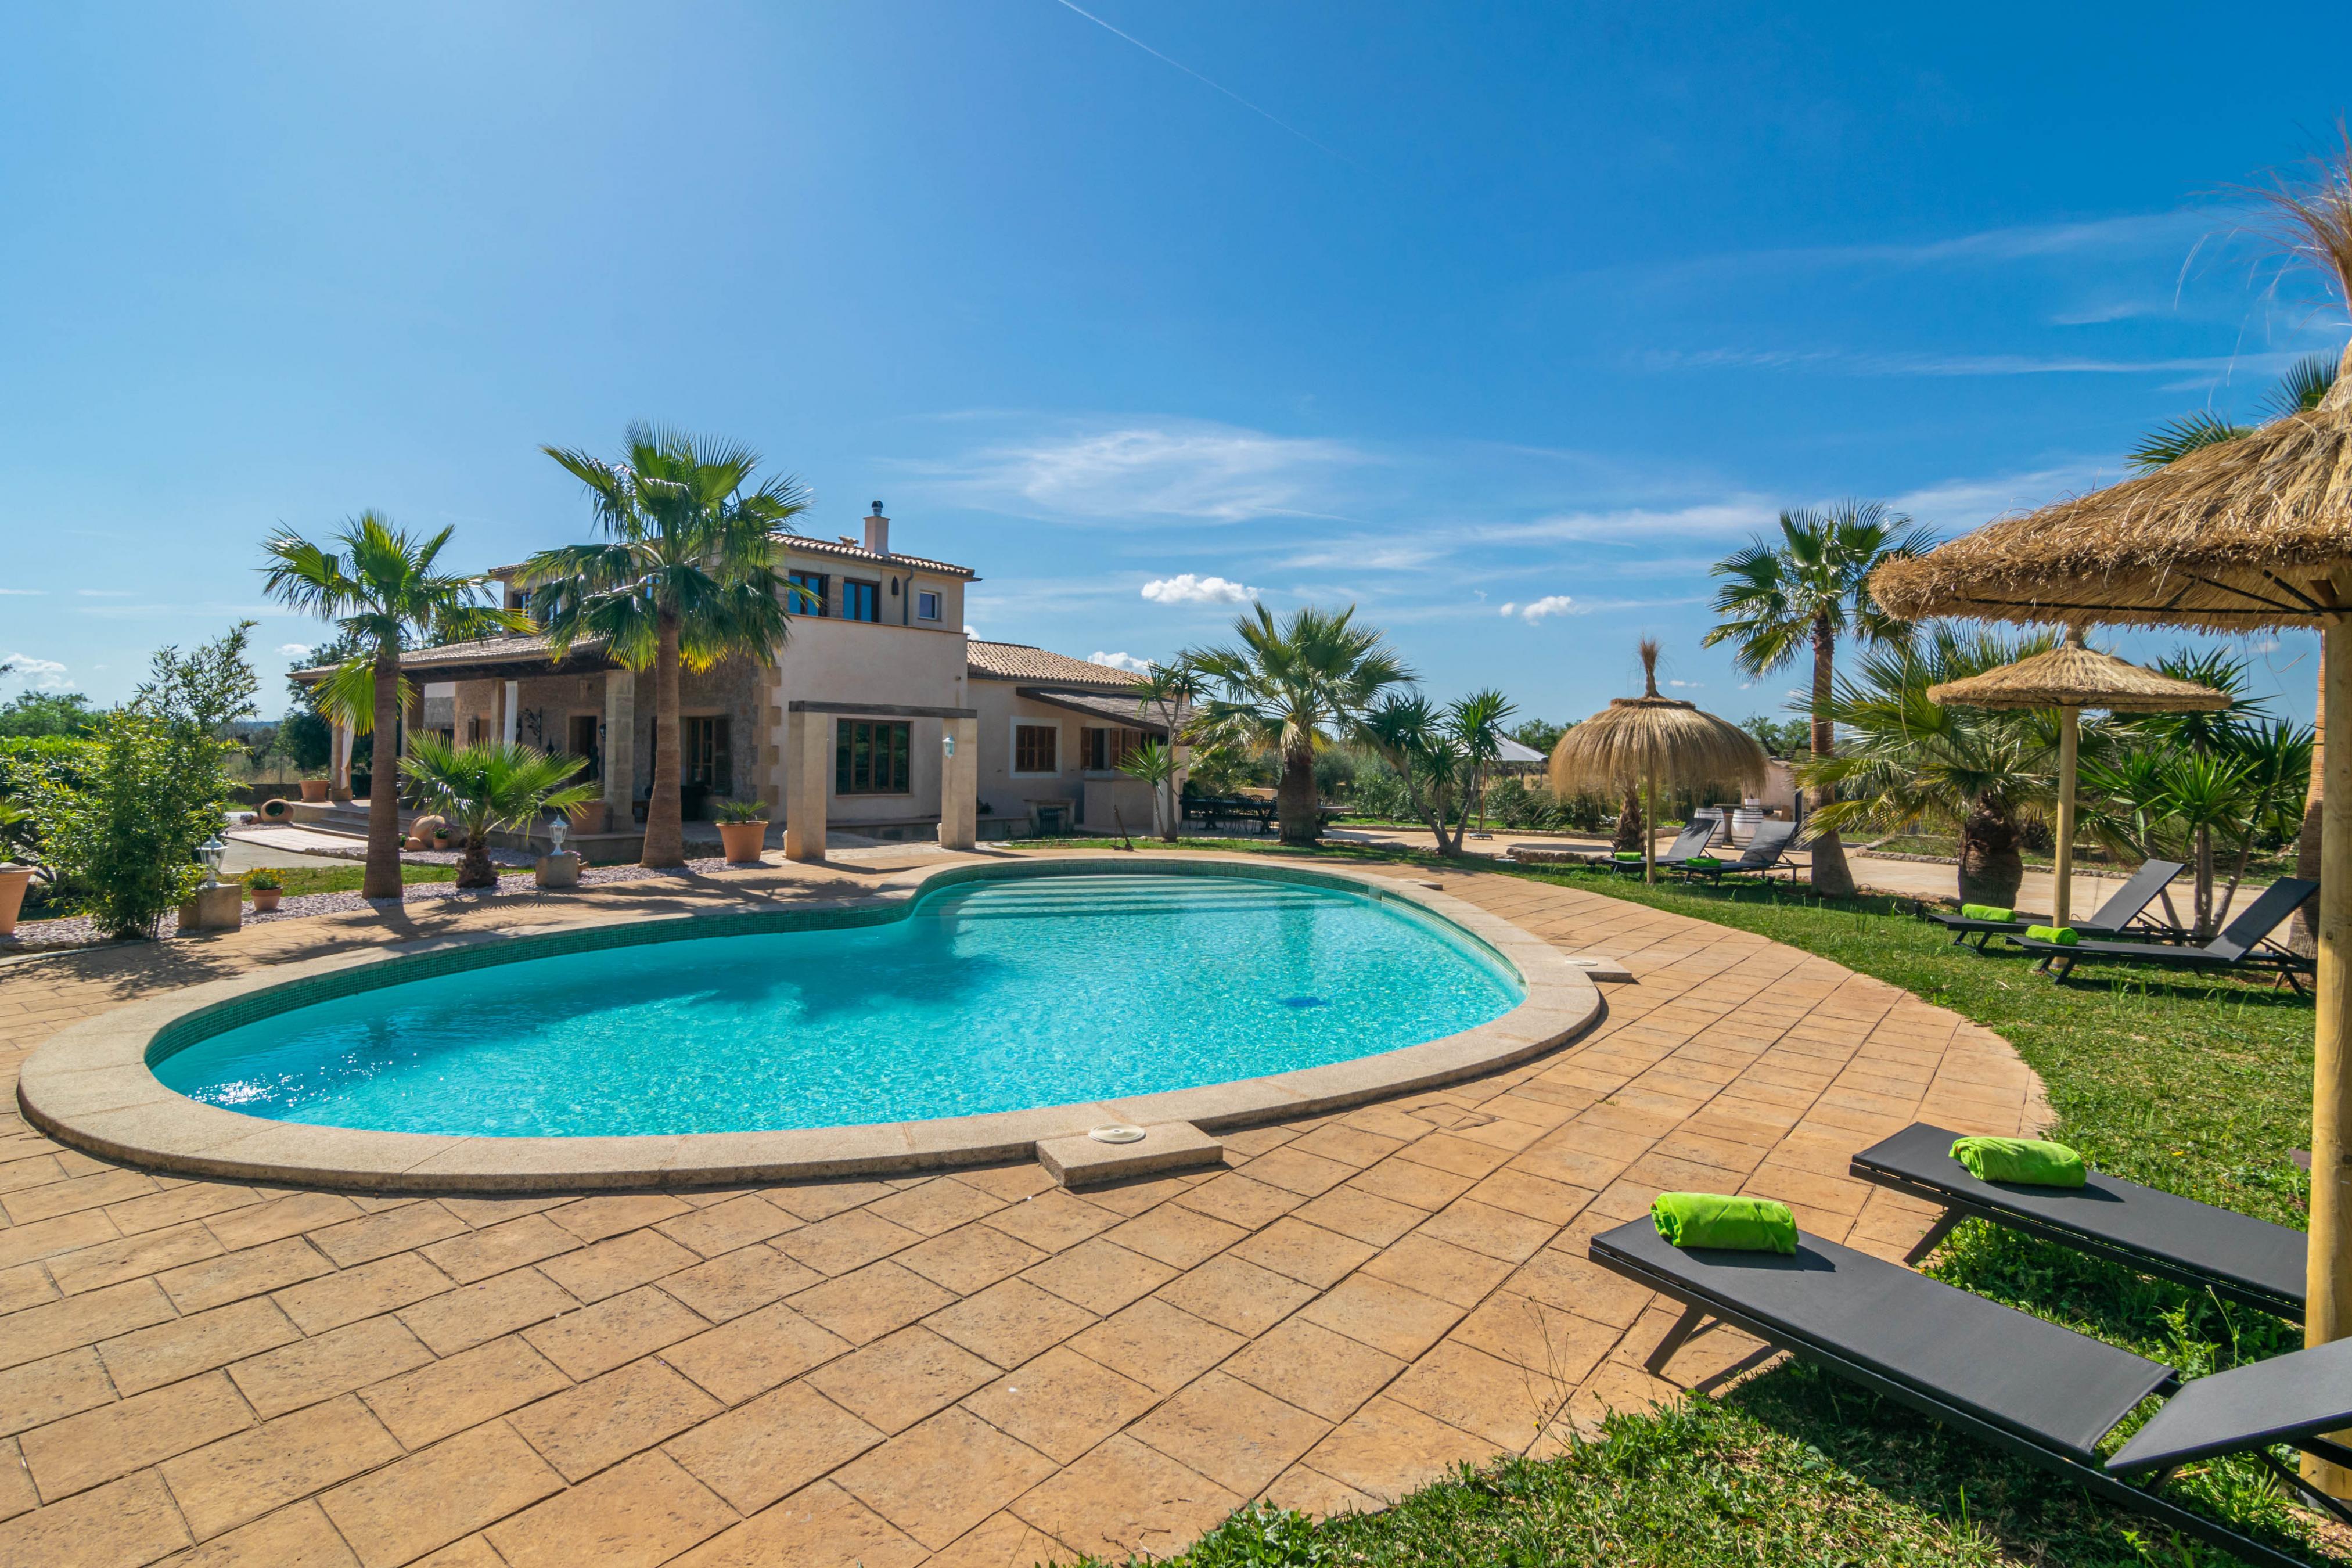 Property Image 1 - FINCA ARIA - Wonderful villa with private pool and free WiFi.